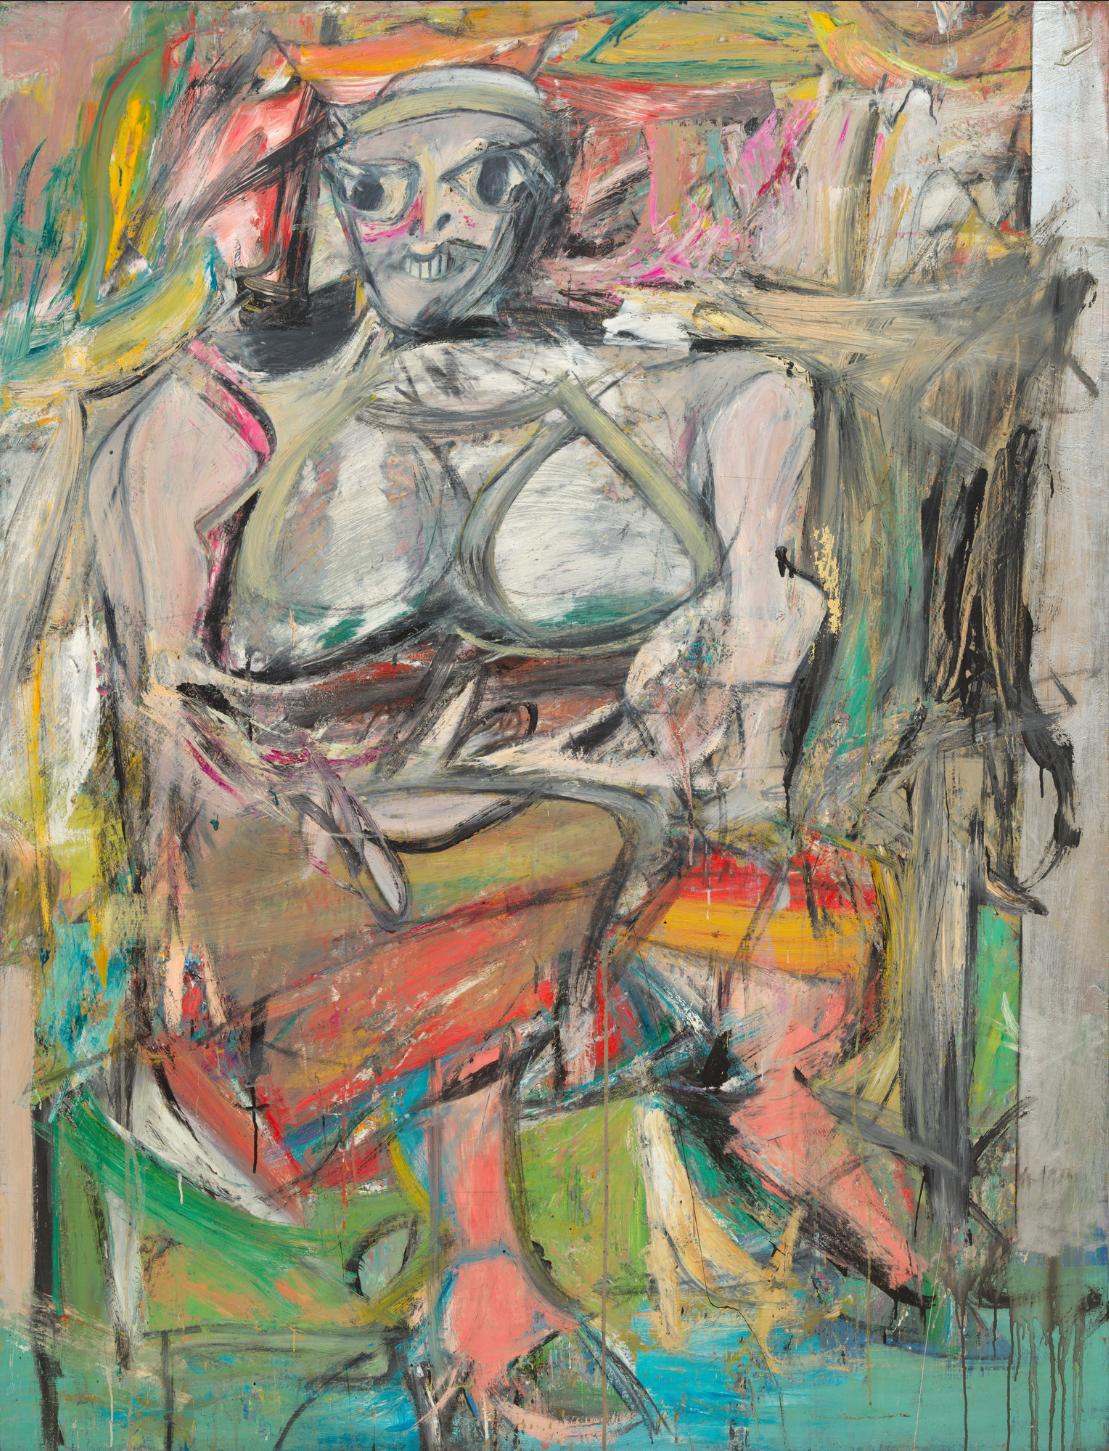 Willem de Kooning’s Woman I (1950–52), Museum of Modern Art, illustrates Abstract Expressionism’s emphasis on bold visible brush strokes, unnatural colors, and distortion of form, and more.